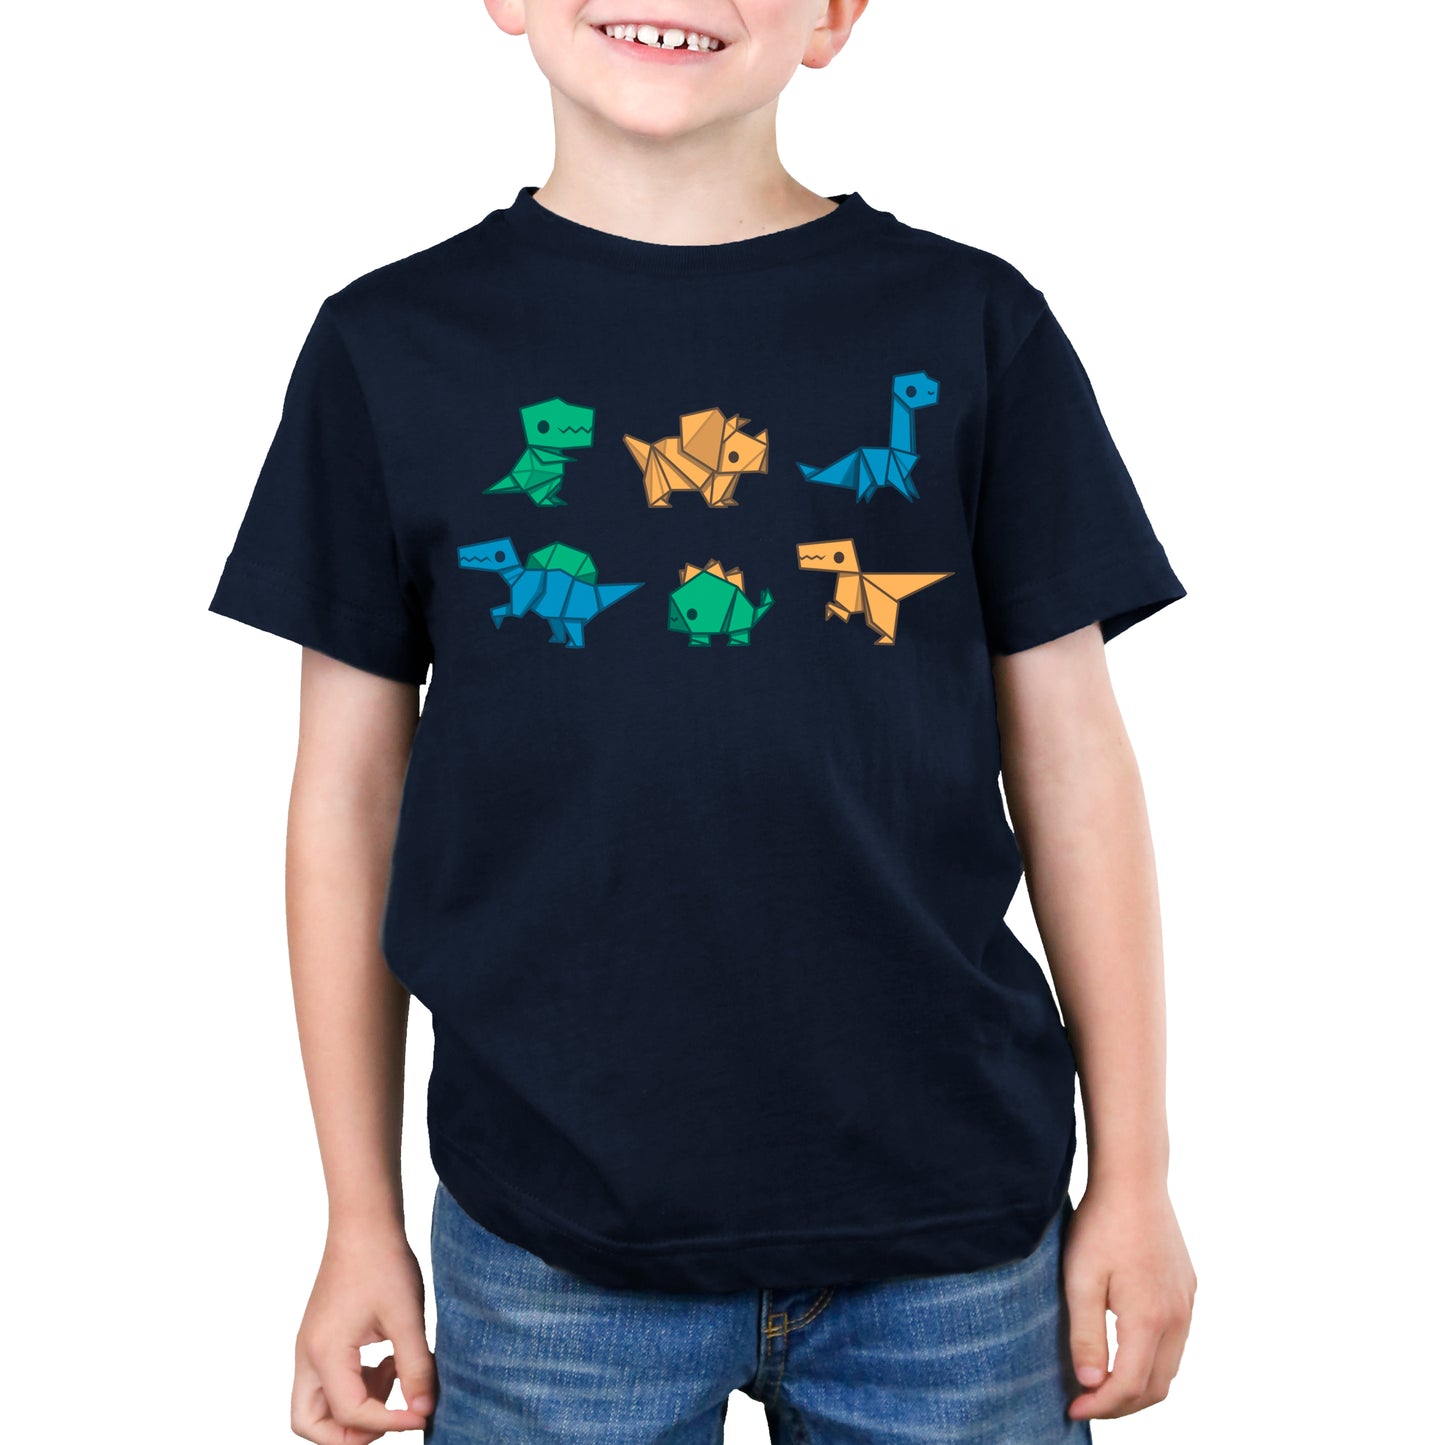 A young boy in a comfortable TeeTurtle T-shirt with colorful Origami Dinos.